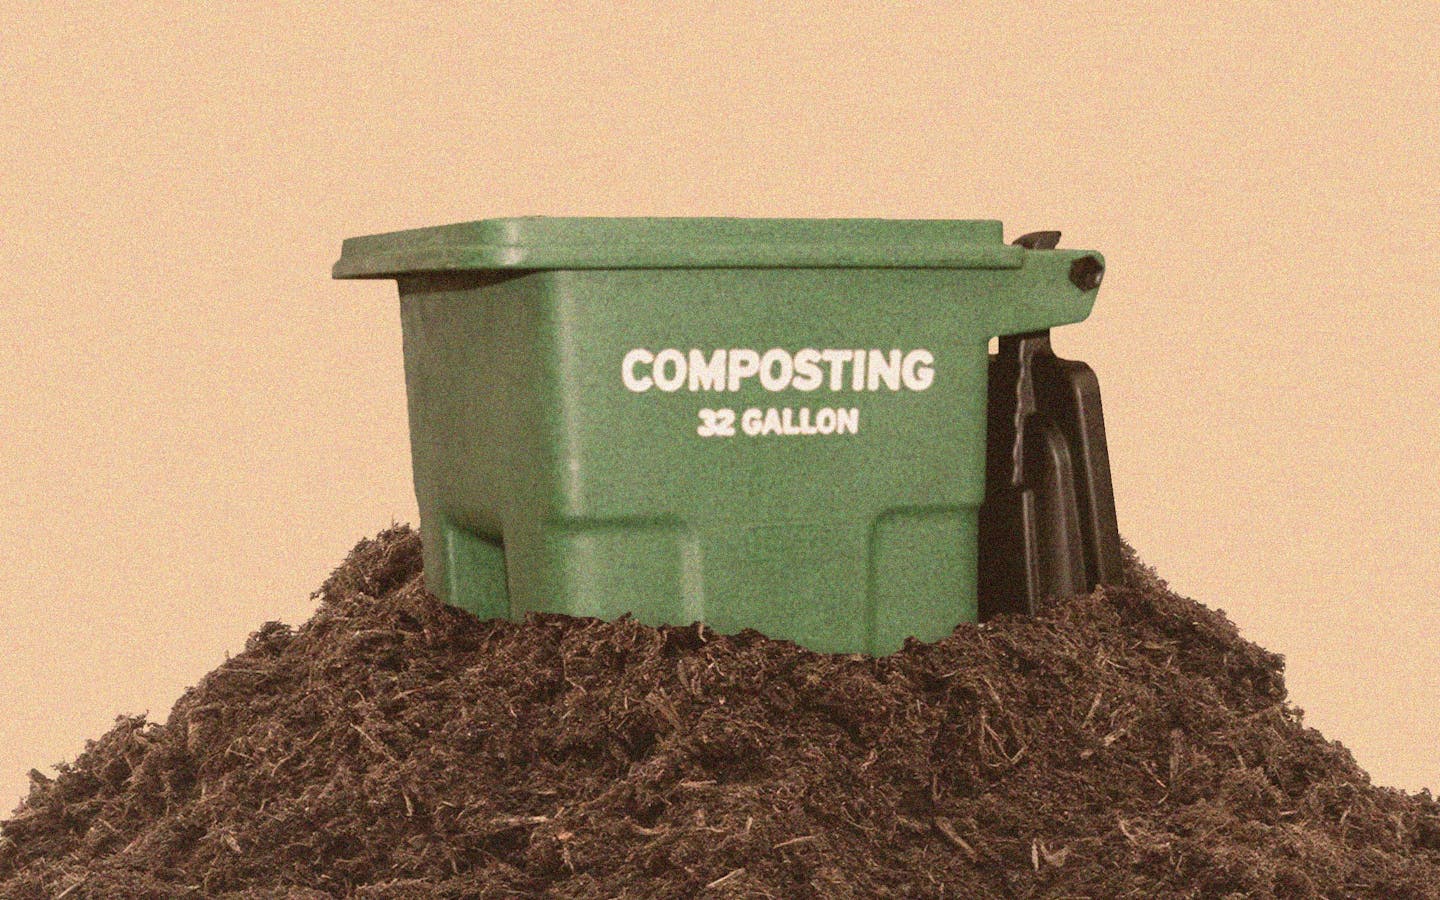 https://img.texasmonthly.com/2022/04/composting-in-texas.jpg?auto=compress&crop=faces&fit=crop&fm=jpg&h=900&ixlib=php-3.3.1&q=45&w=1600